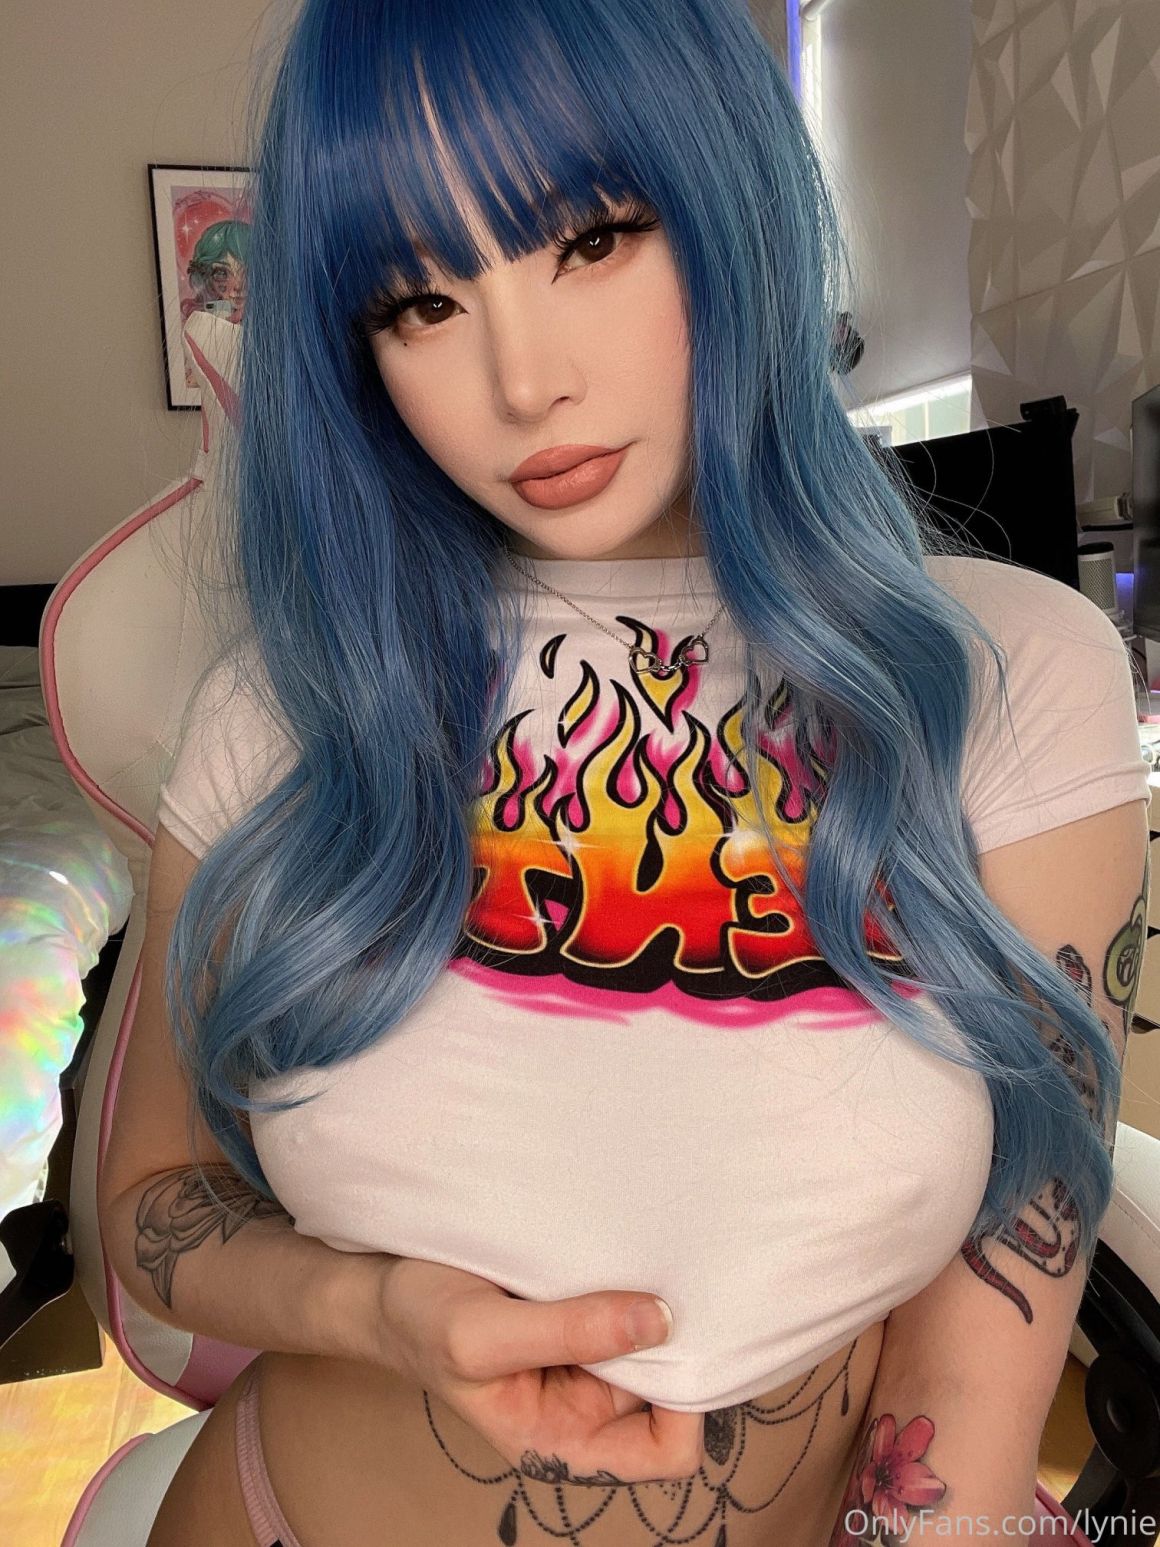 AsianOnlyfans 050 598 20211009